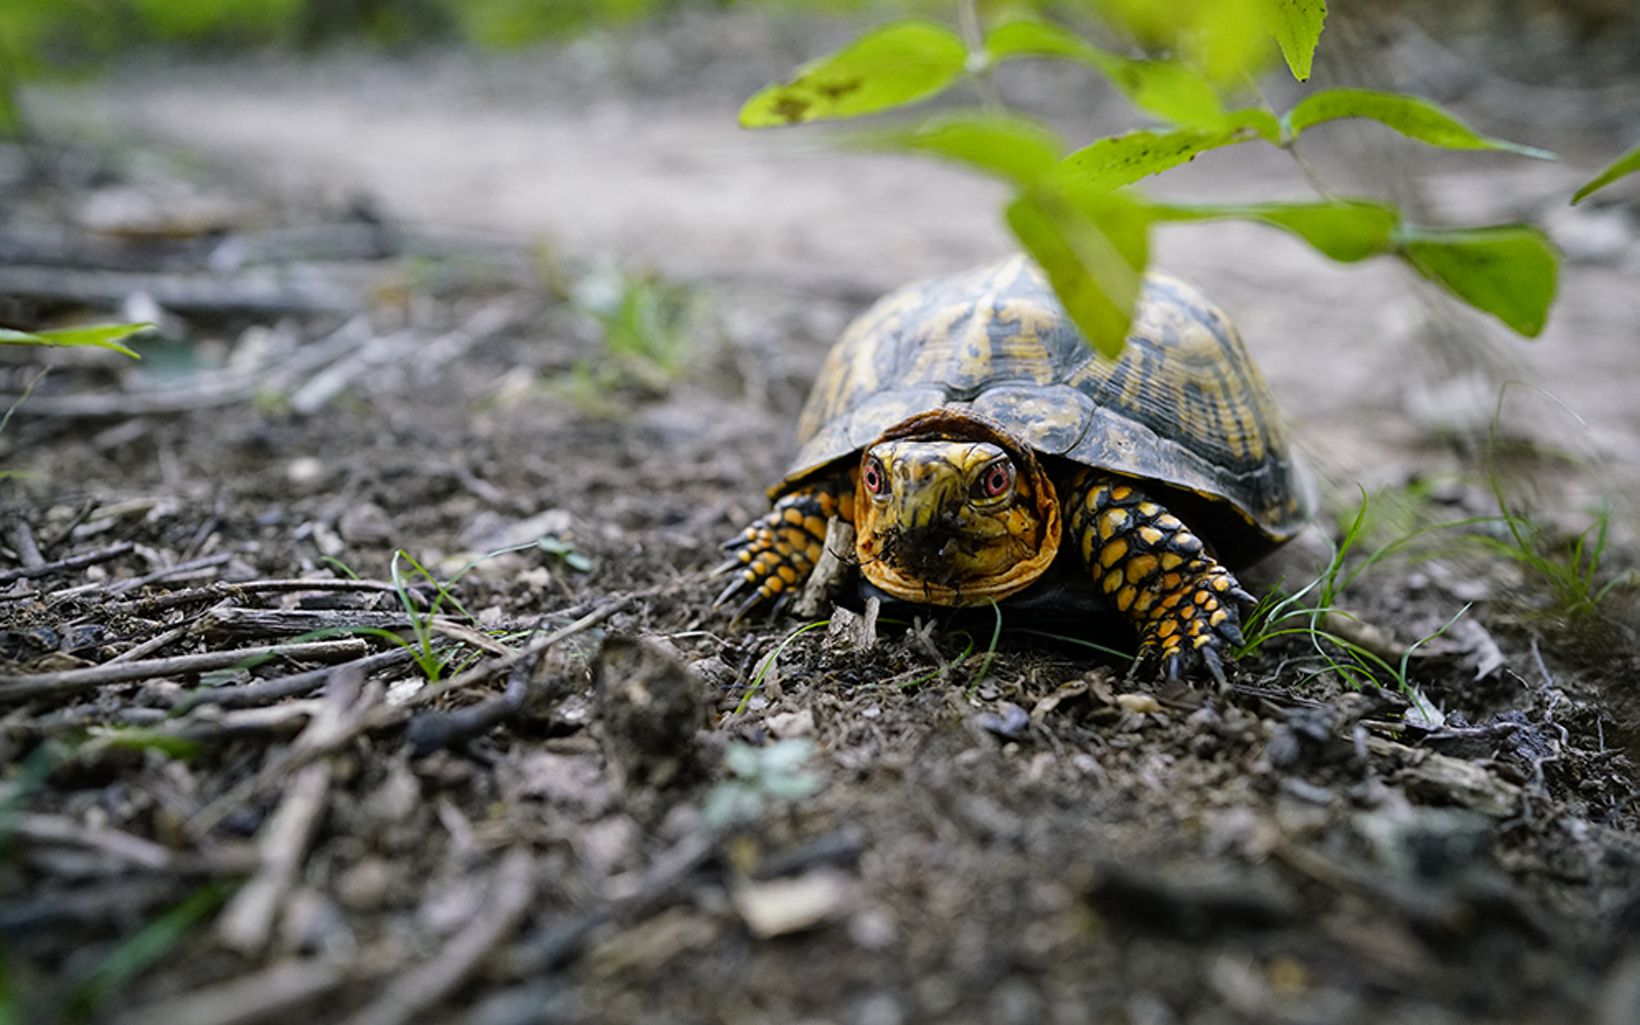 A turtle with yellow and black markings stands on a dirt path that is covered with little sticks.